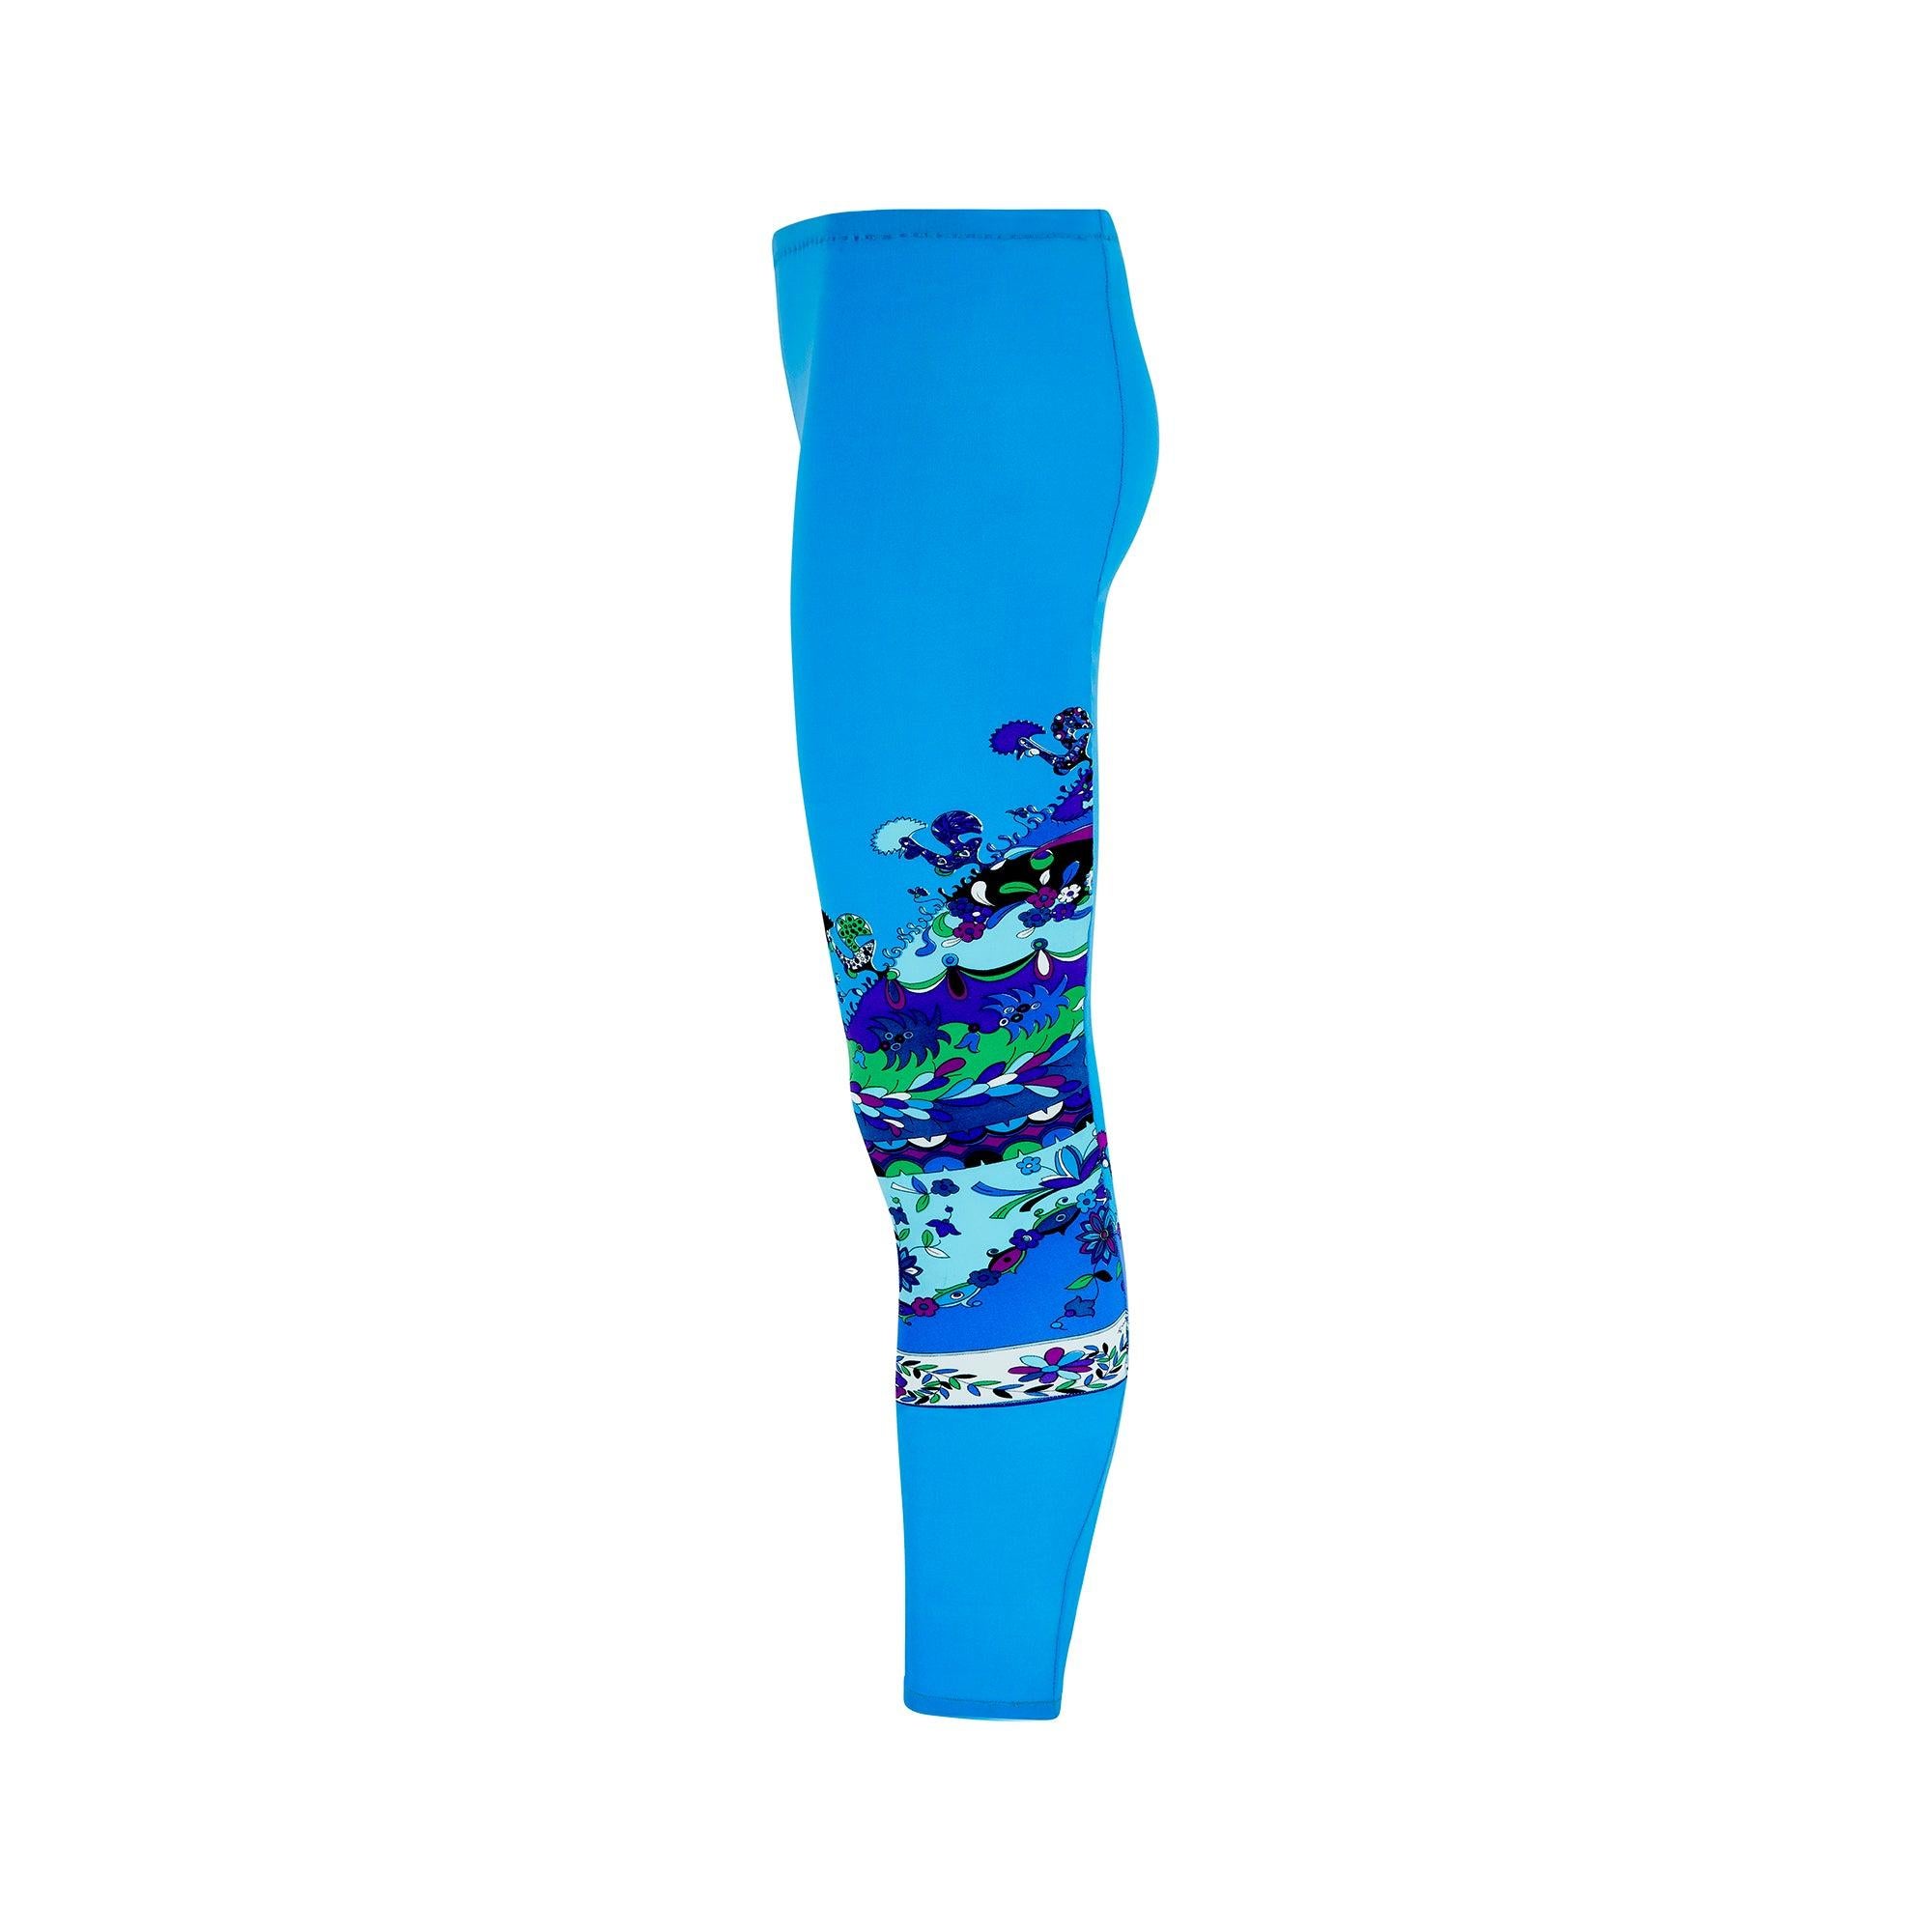 Dating to the late 1960s, these Pucci leggings are as vibrant as the day they were made. In eye-catching cerulean blue, they are adorned with the signature psychedelic Pucci print, with birds and botanicals in shades of purple, blue and green